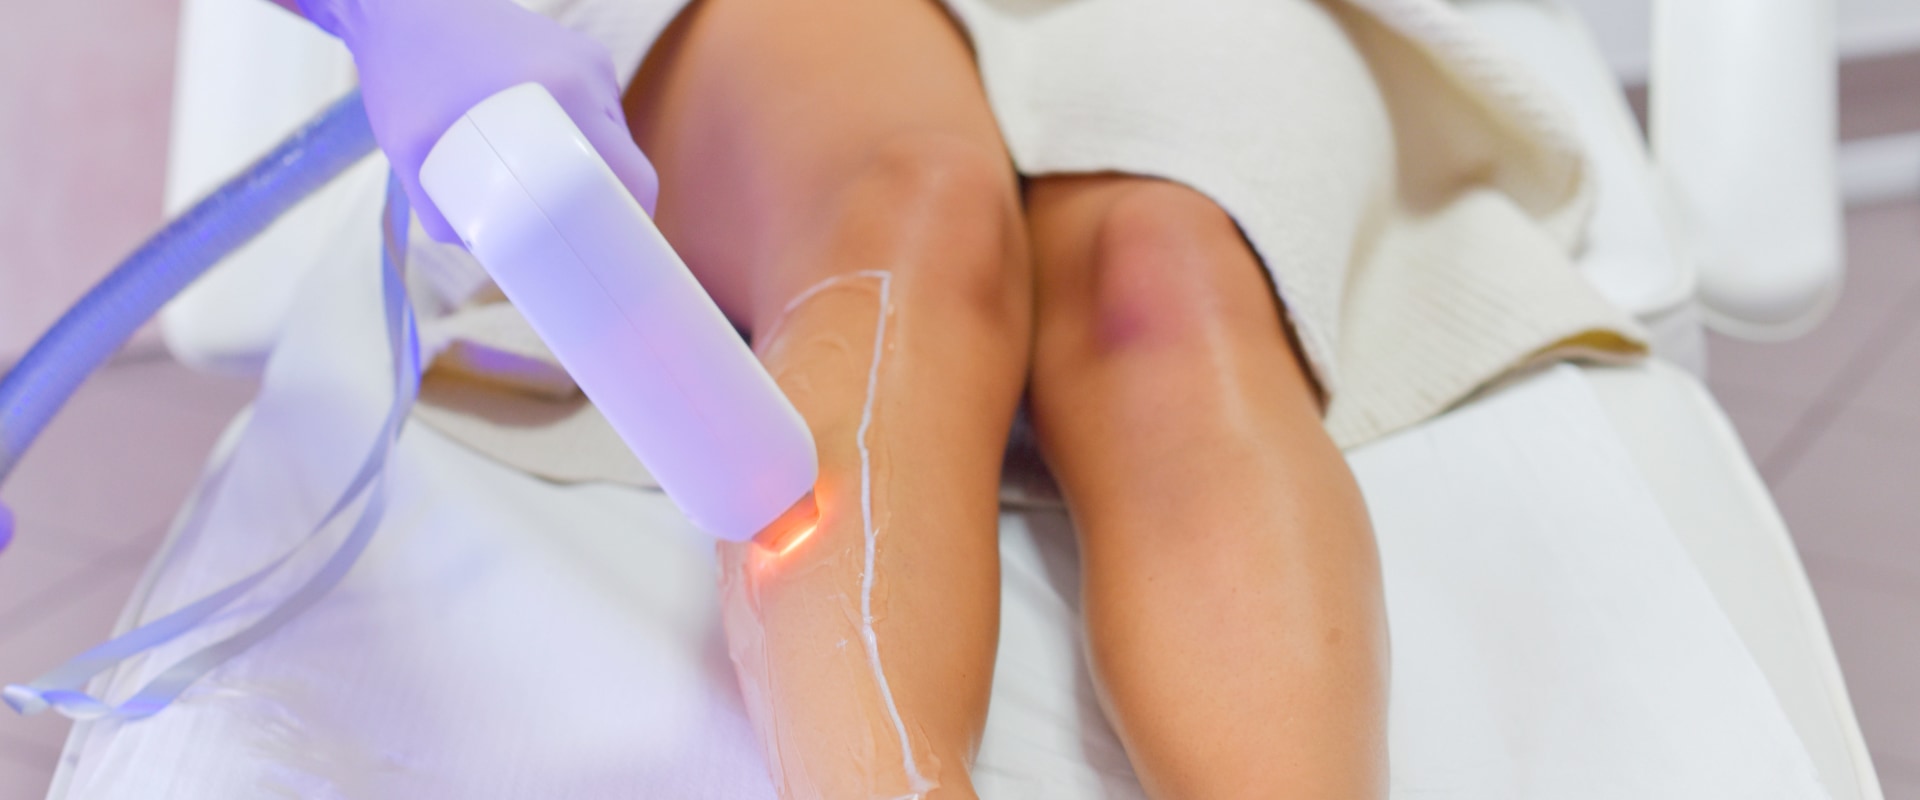 At-Home Laser Hair Removal: What You Need to Know